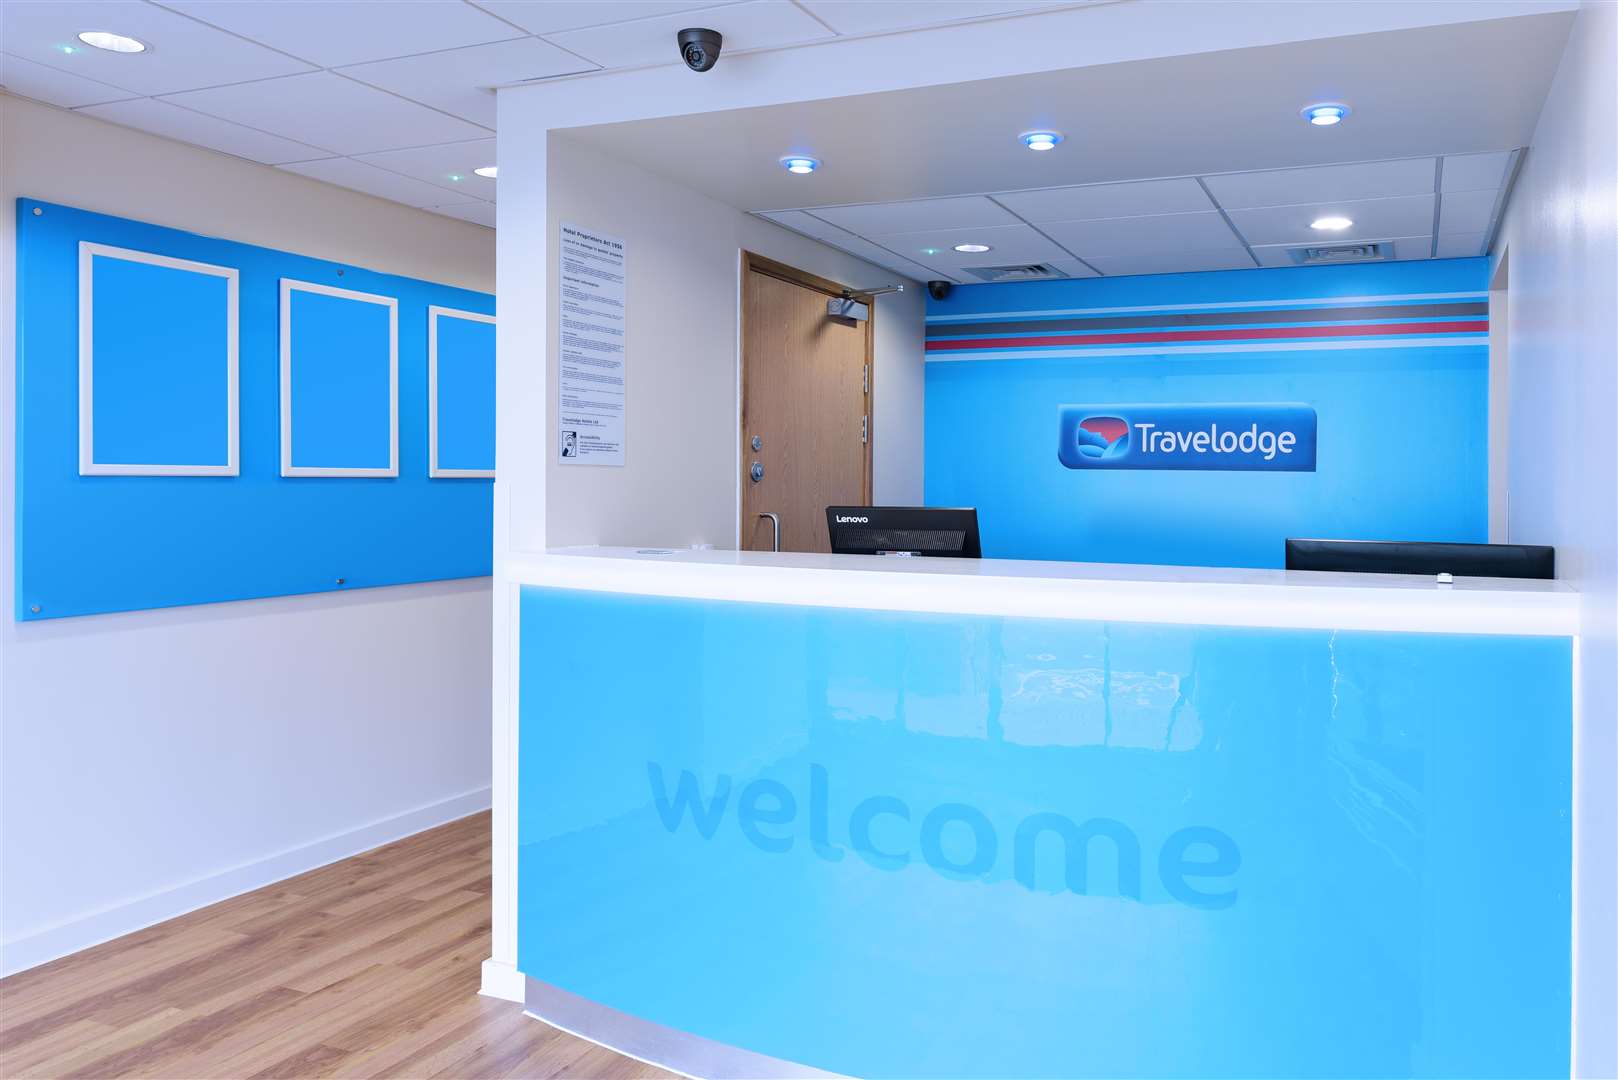 Travelodge has opened sites recently in Dover and Gravesend